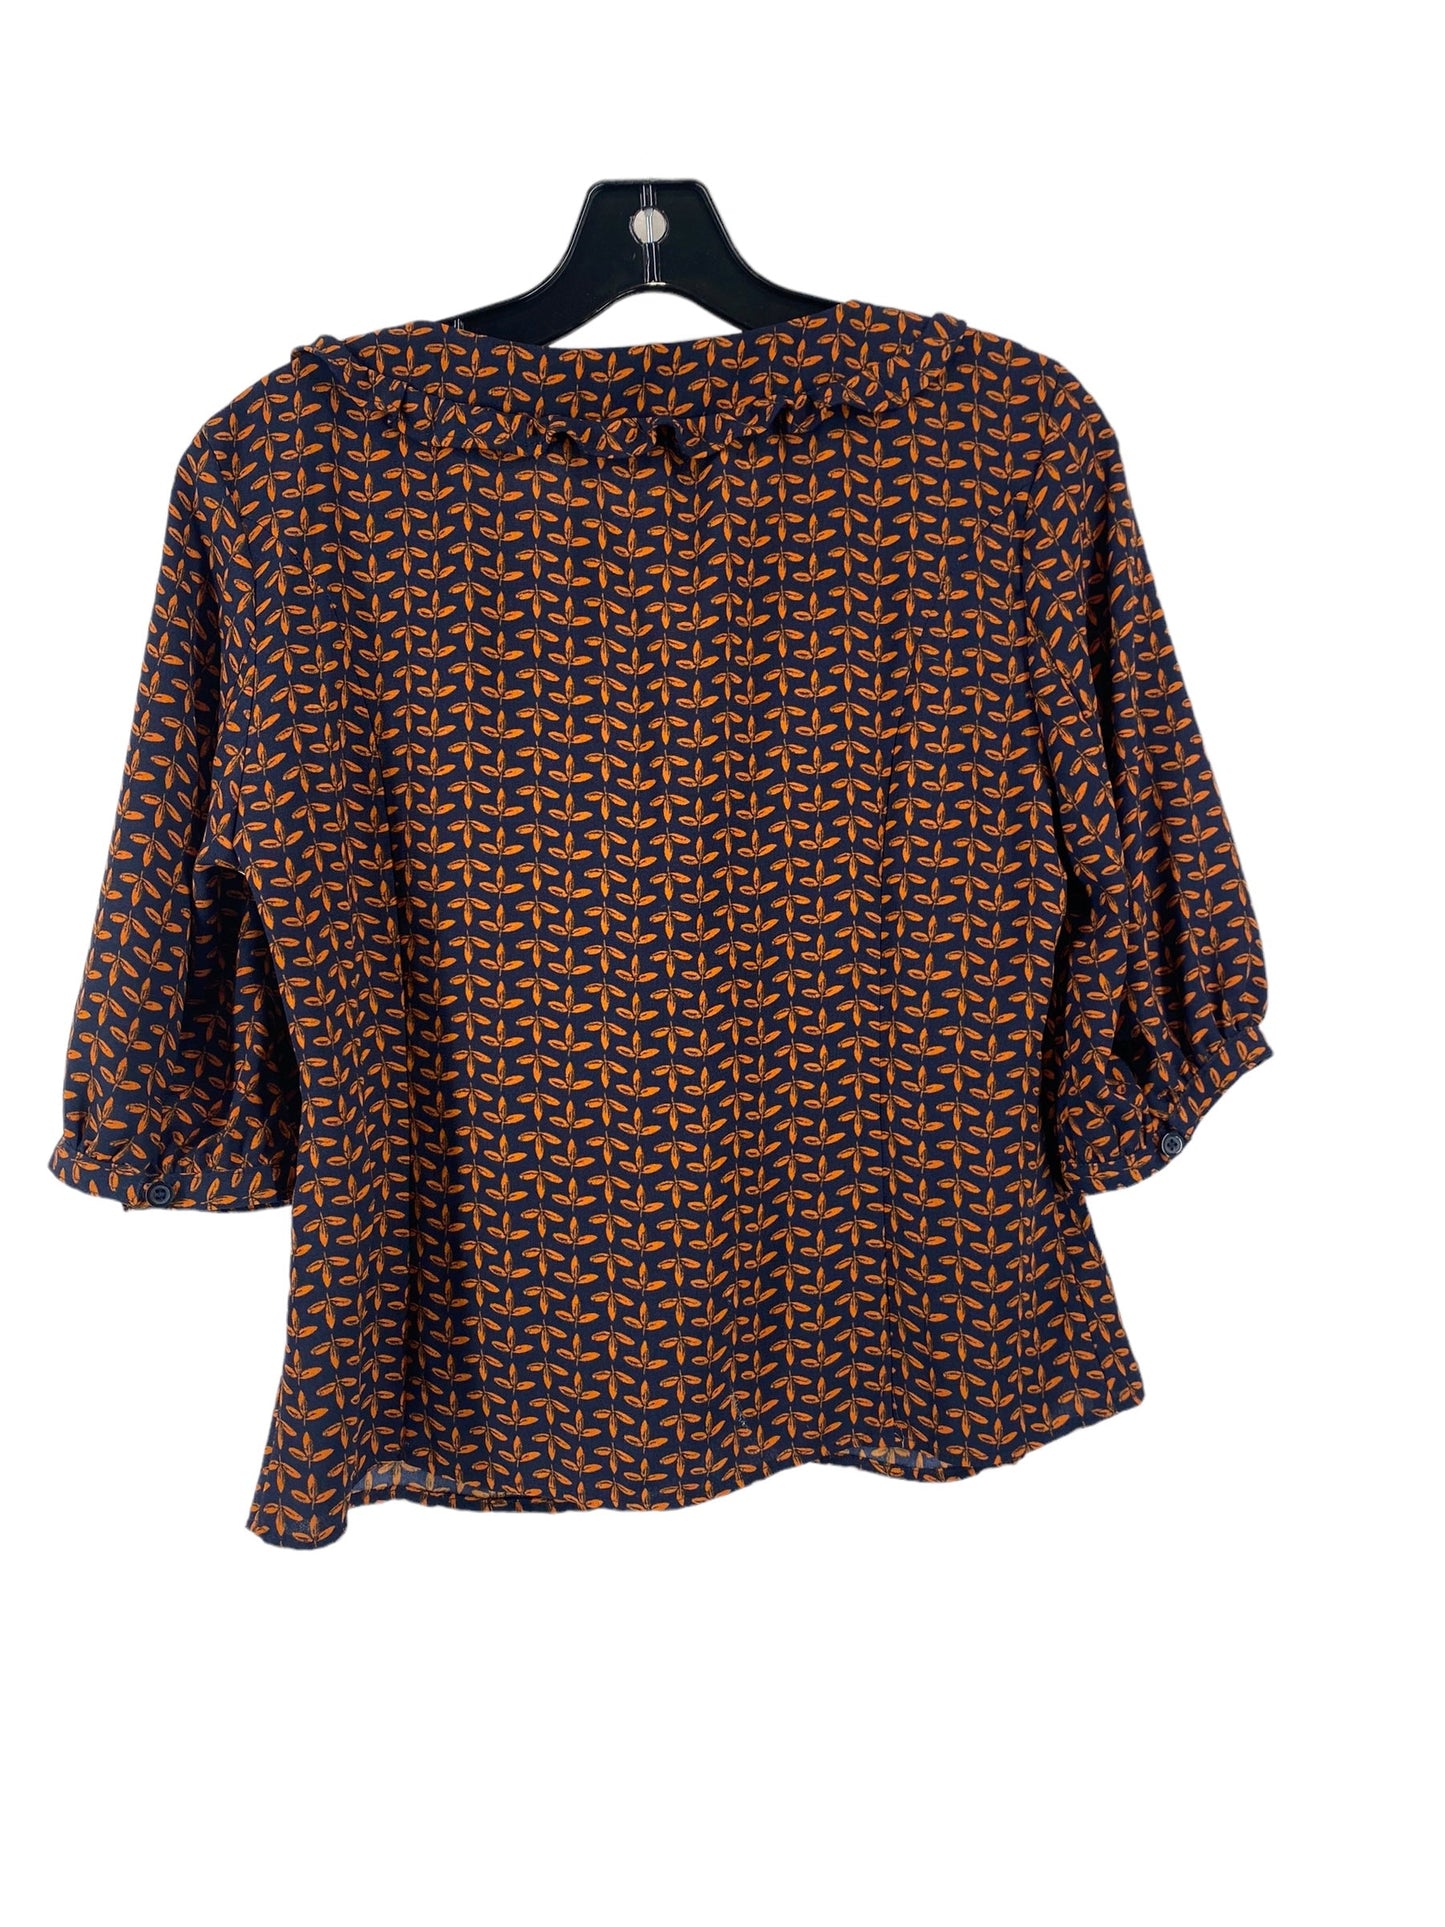 Blouse Short Sleeve By Abound  Size: M